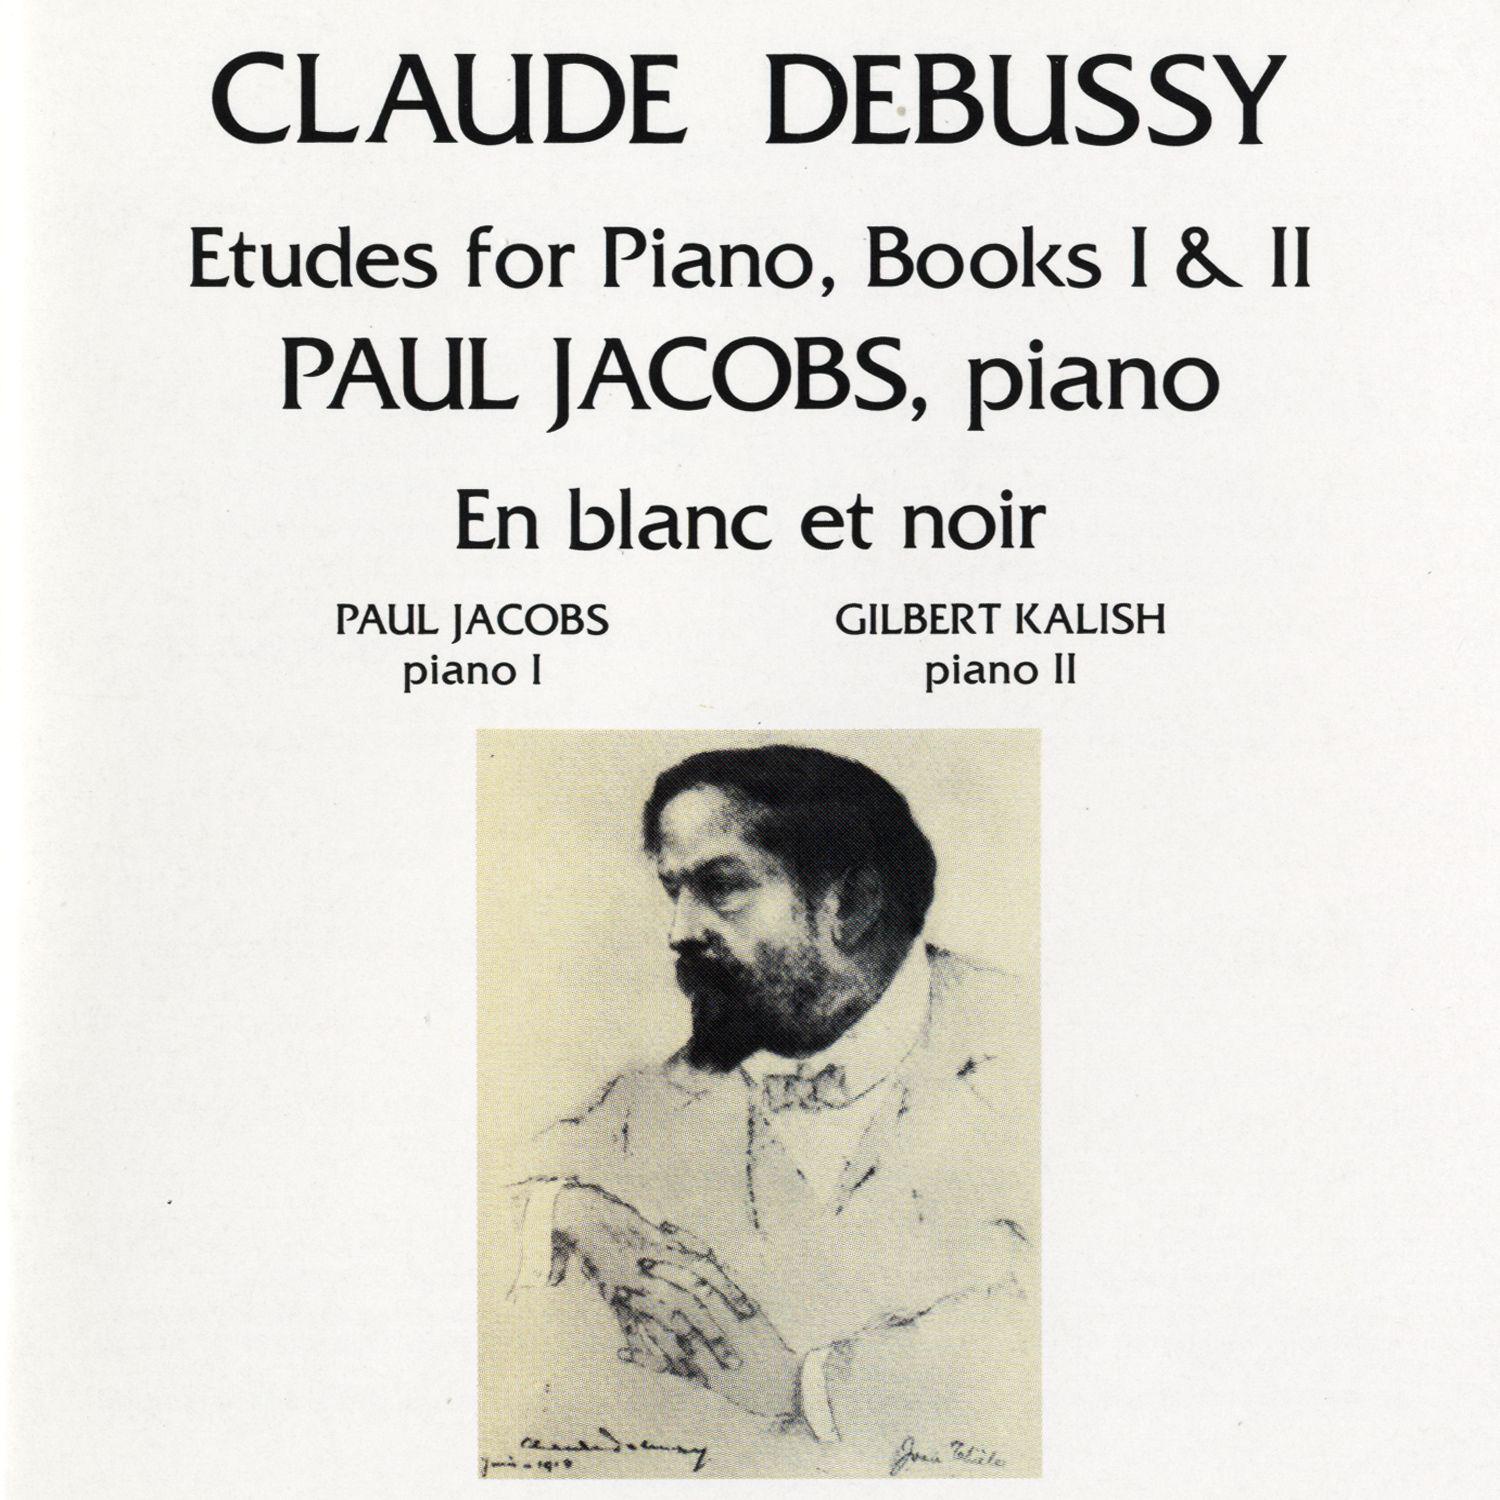 Debussy: Etudes for Piano, Book II; Pour les notes repetees